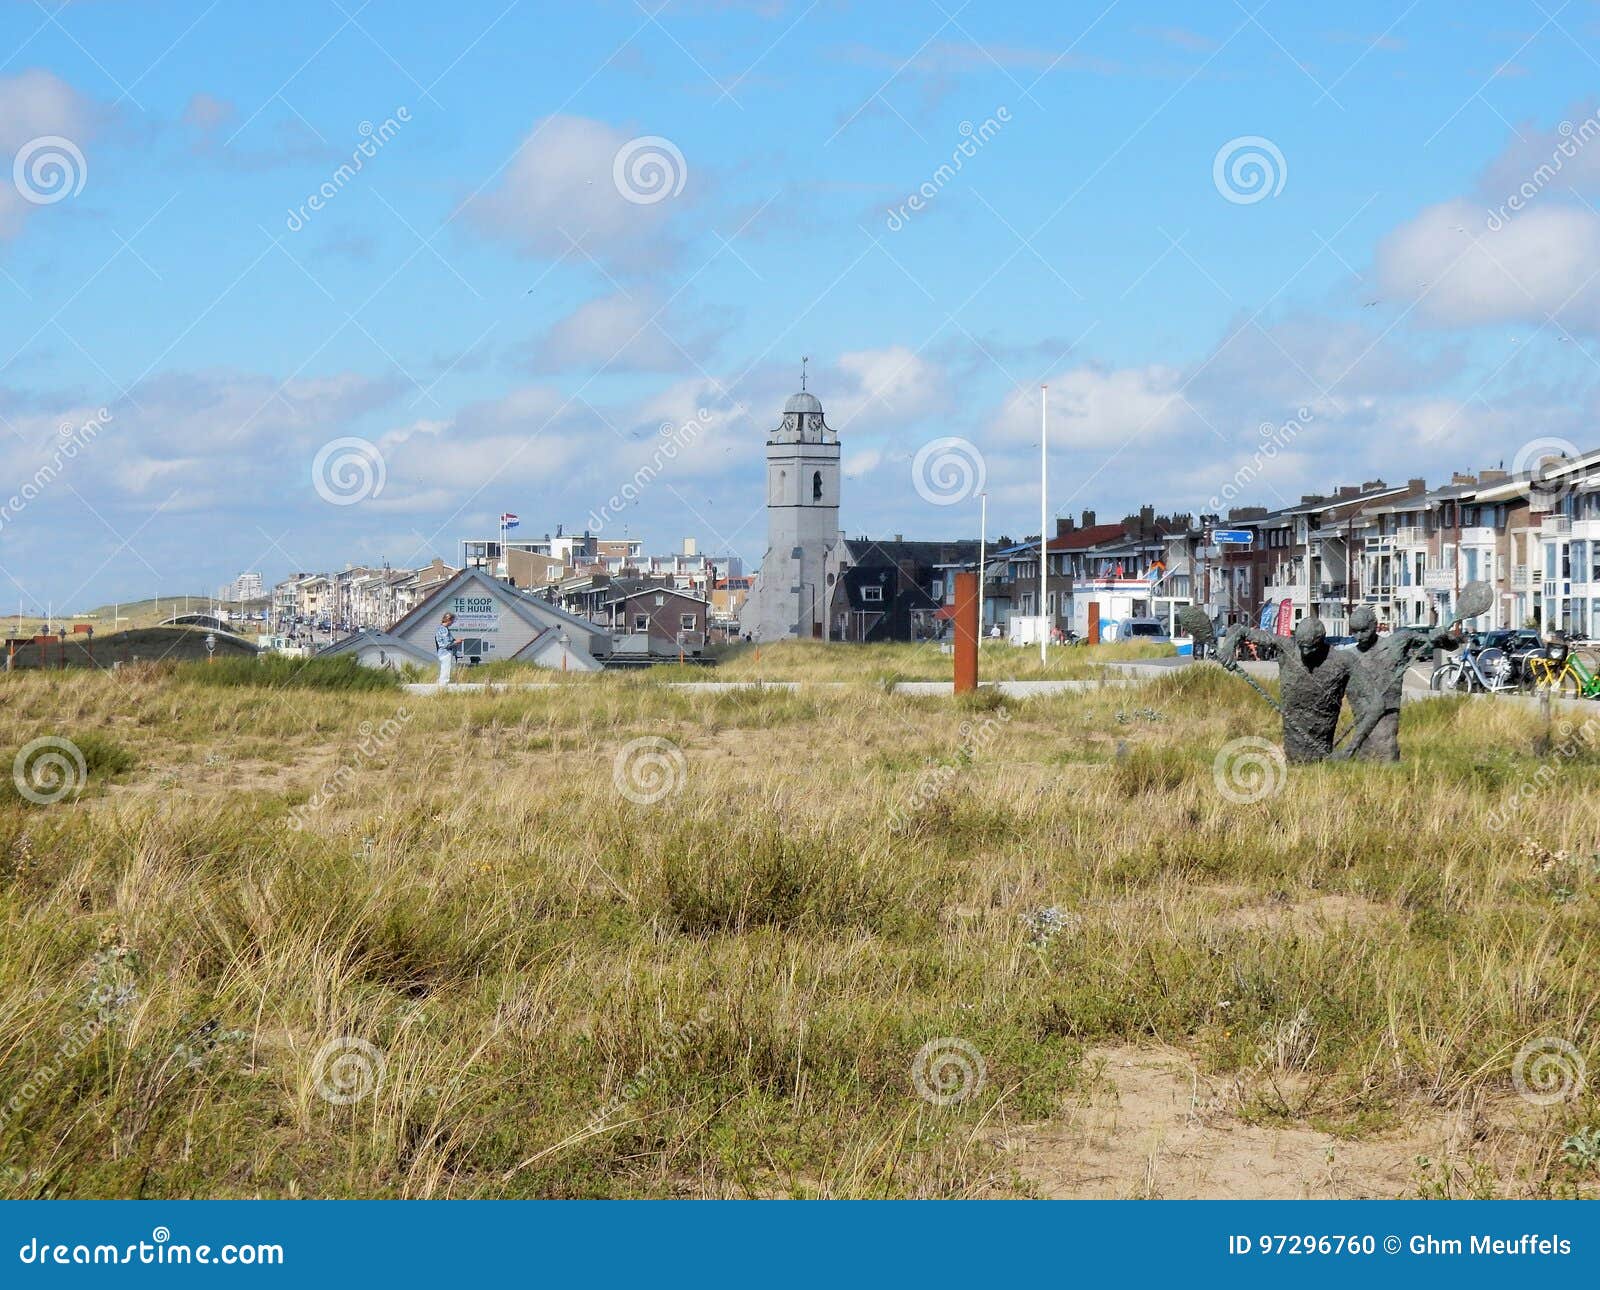 townscape katwijk aan zee with church, dwellings and dunes with grass